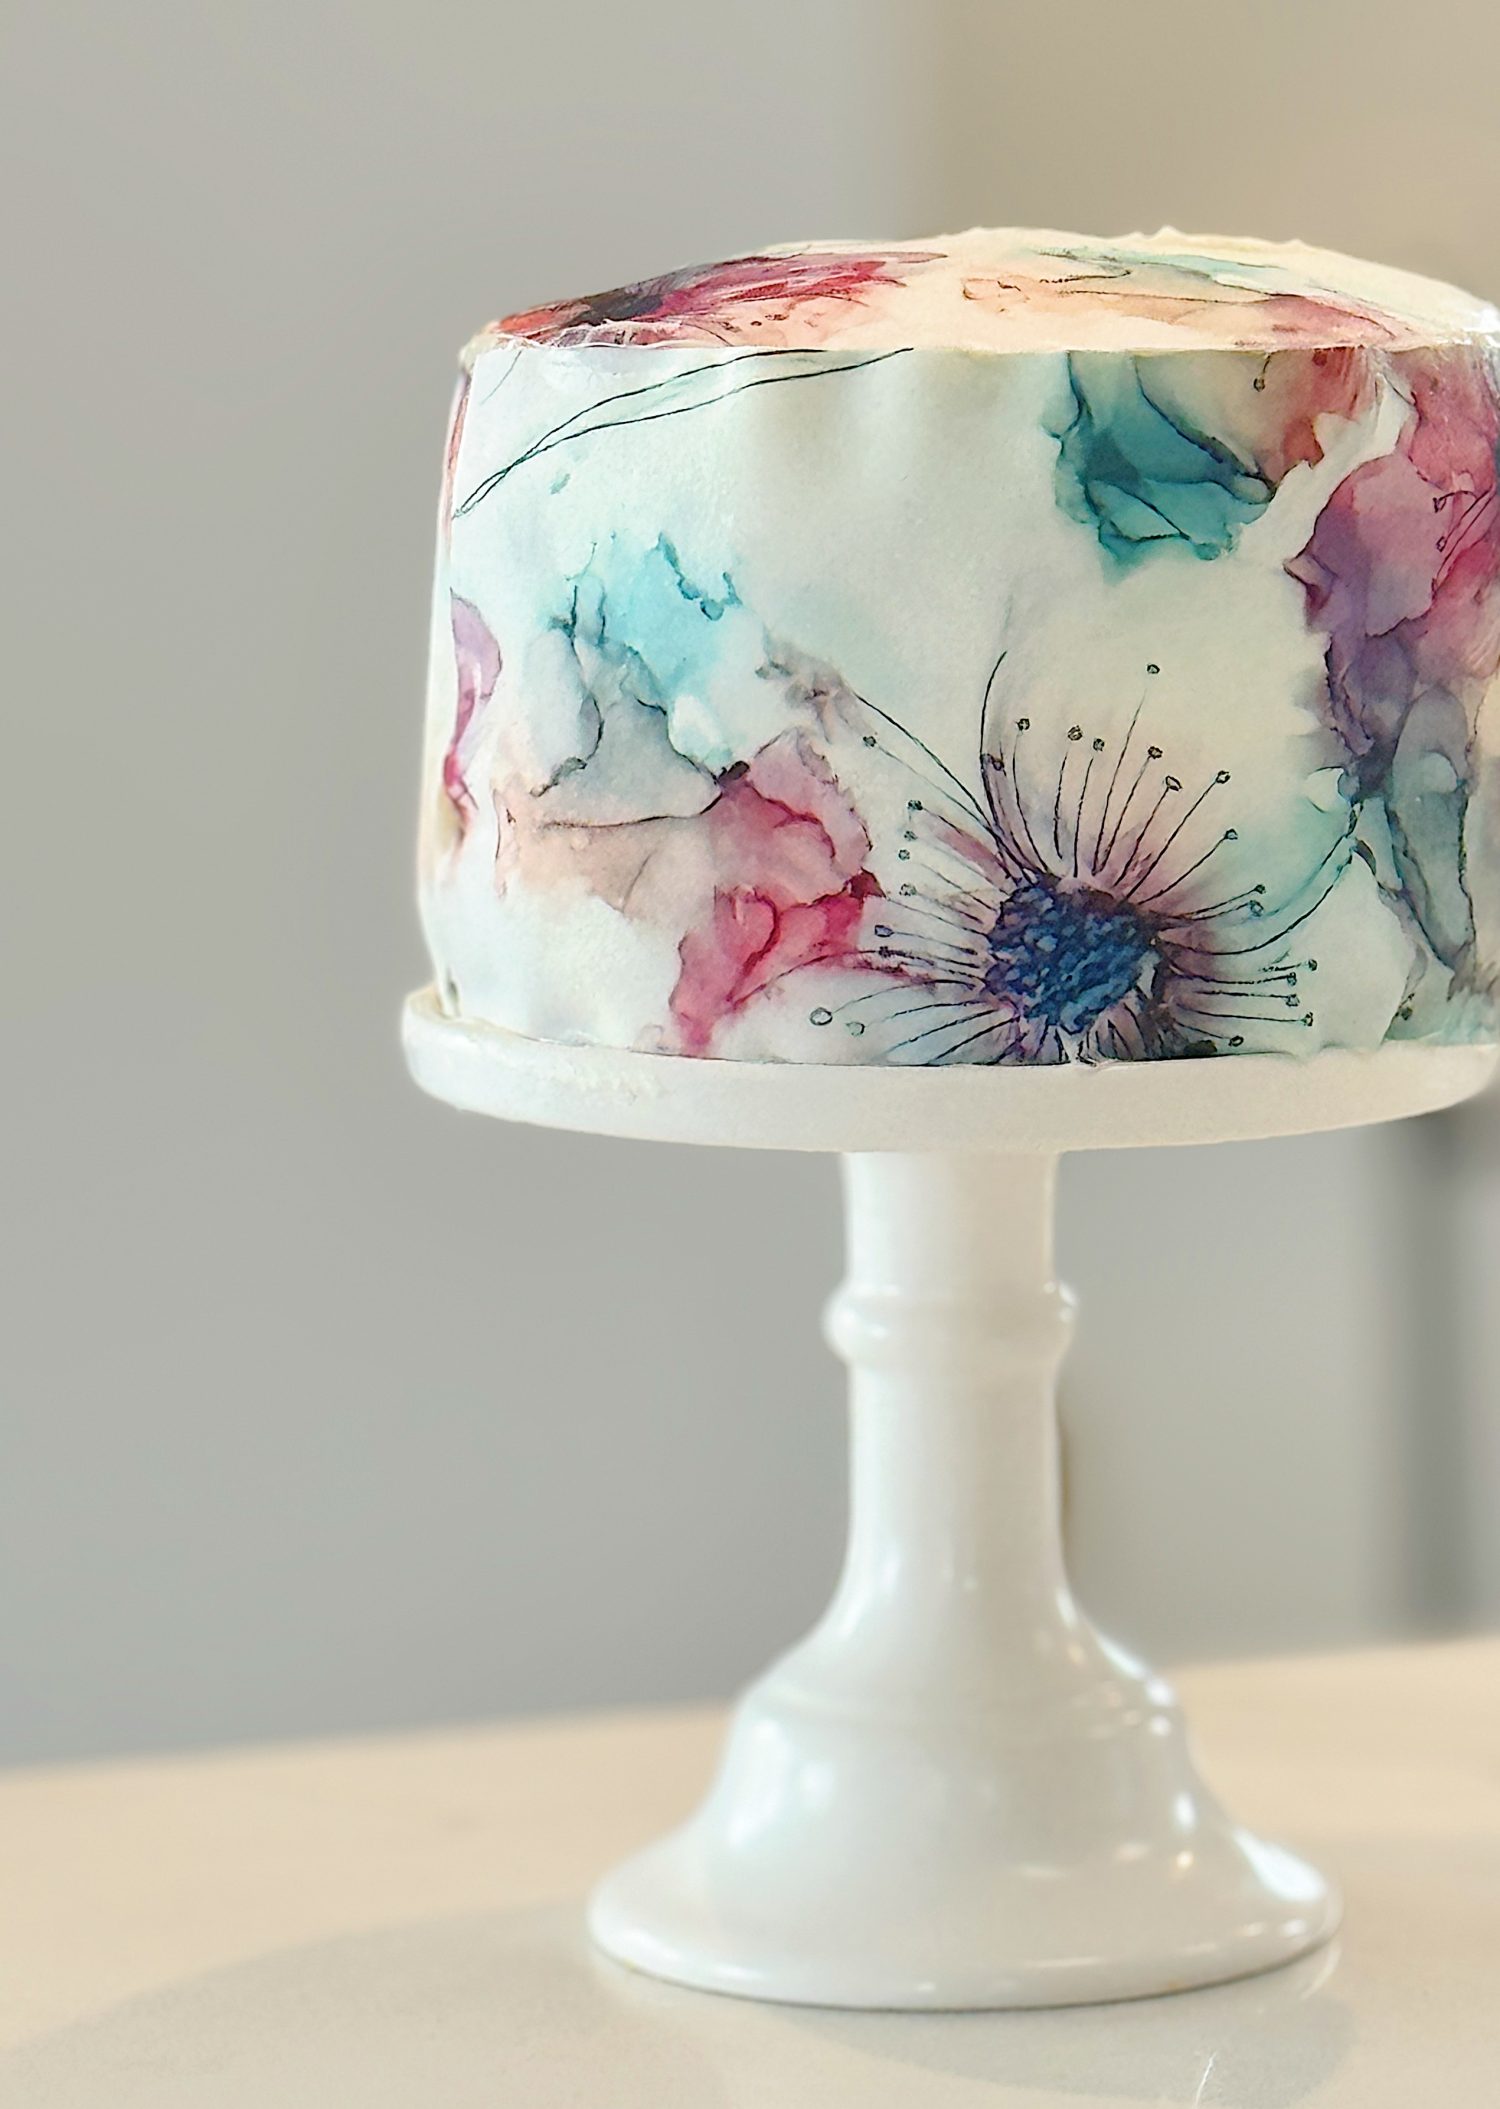 A white frosted cake with watercolor-style floral designs in various colors sits on a white cake stand.